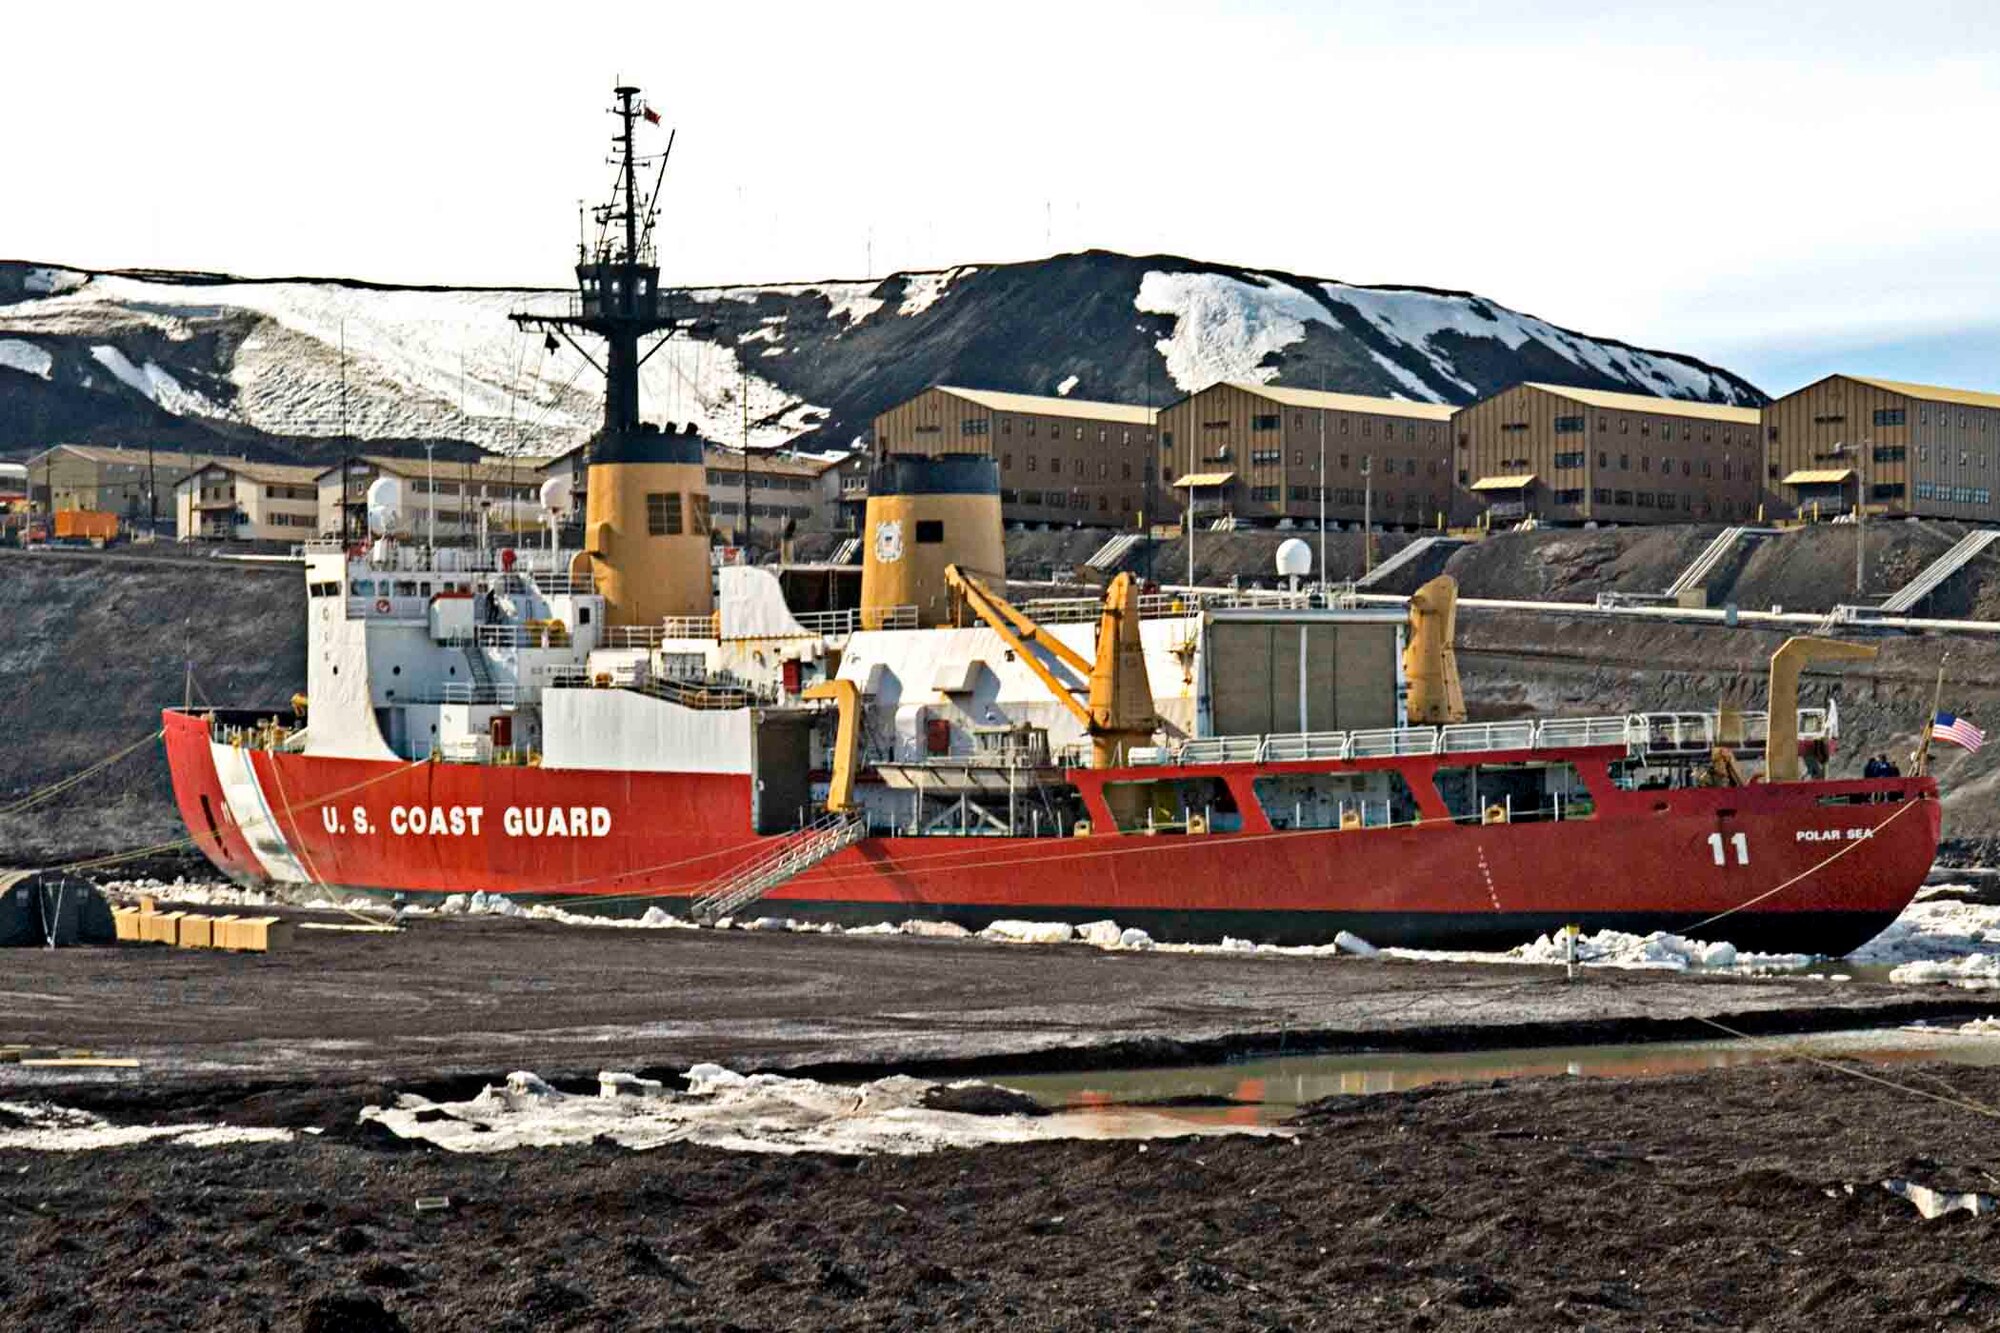 MCMURDO, ANTARCTICA (Jan. 10, 2007)- The Coast Guard Cutter Polar Sea moored up to the "ice pier" at McMurdo Station today.  The Polar Sea is on a six-month deployment as part of the Air Force-led Joint Task Force Support Forces Antarctica, Operation Deep Freeze 2007, clearing a navigable channel for supply ships to get needed equipment and goods to scientists working in McMurdo.  The Polar Sea made a port call to McMurdo to refuel and take on supplies for the crew.  This is the first port call for the Sea since leaving Sydney, Australia on December 23, 2006. (US Coast Guard Photo by Petty Officer 3rd Class Kevin J. Neff)